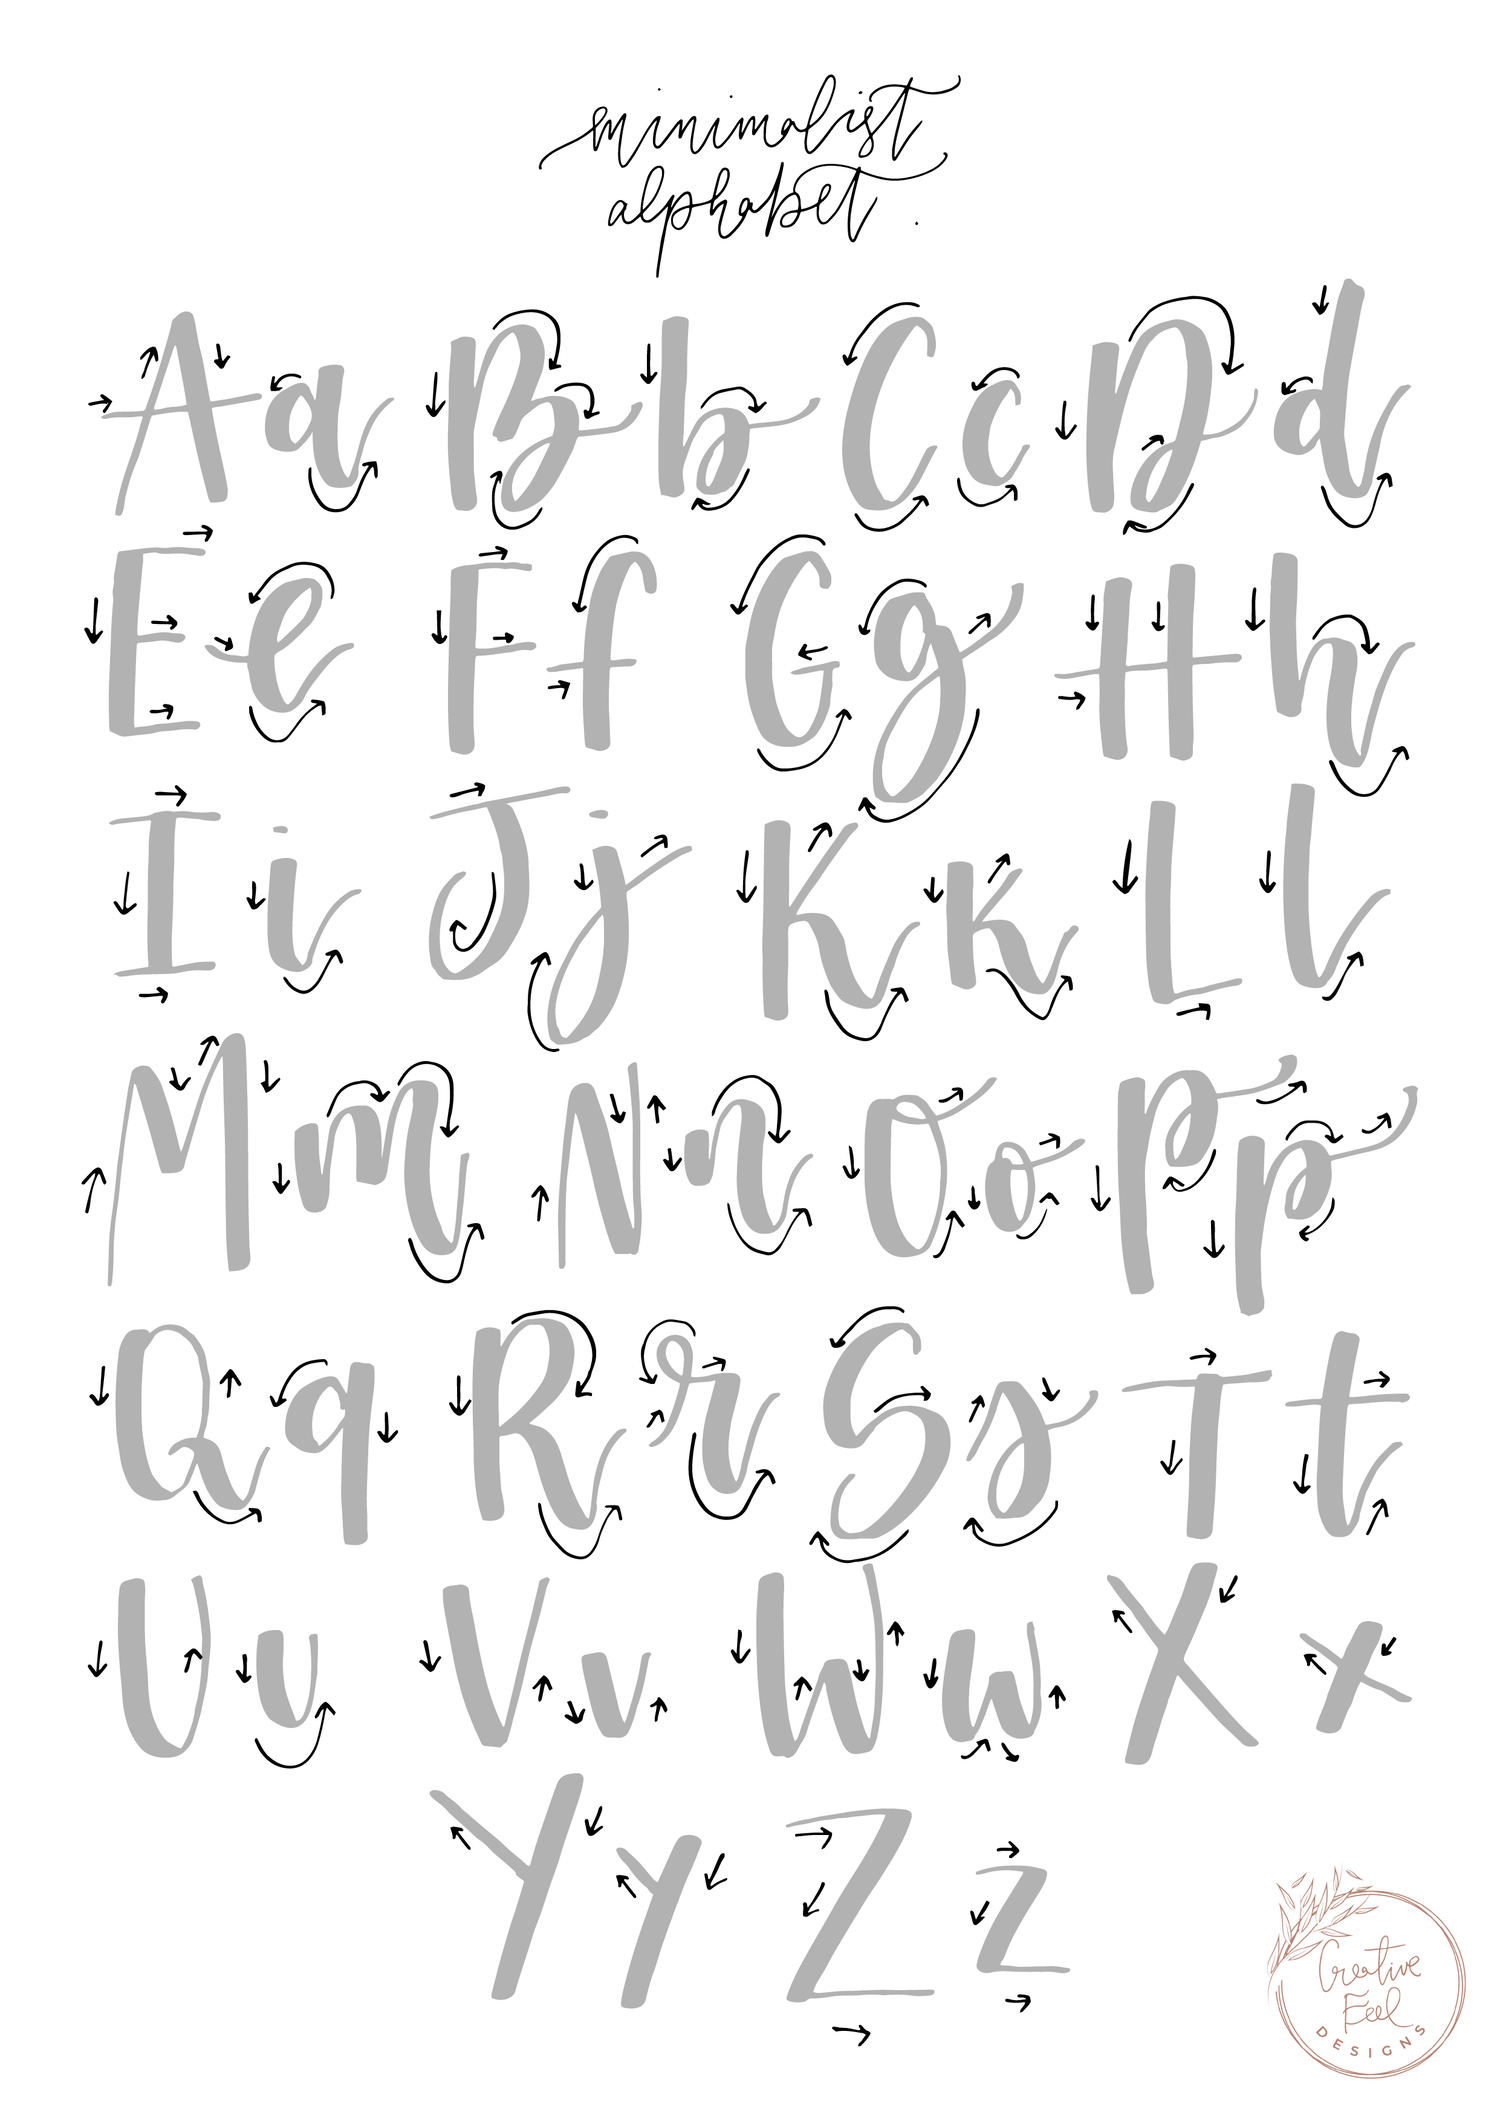 free-brush-lettering-practice-sheet-minimalist-alphabet-modern-calligraphy-kits-and-classes